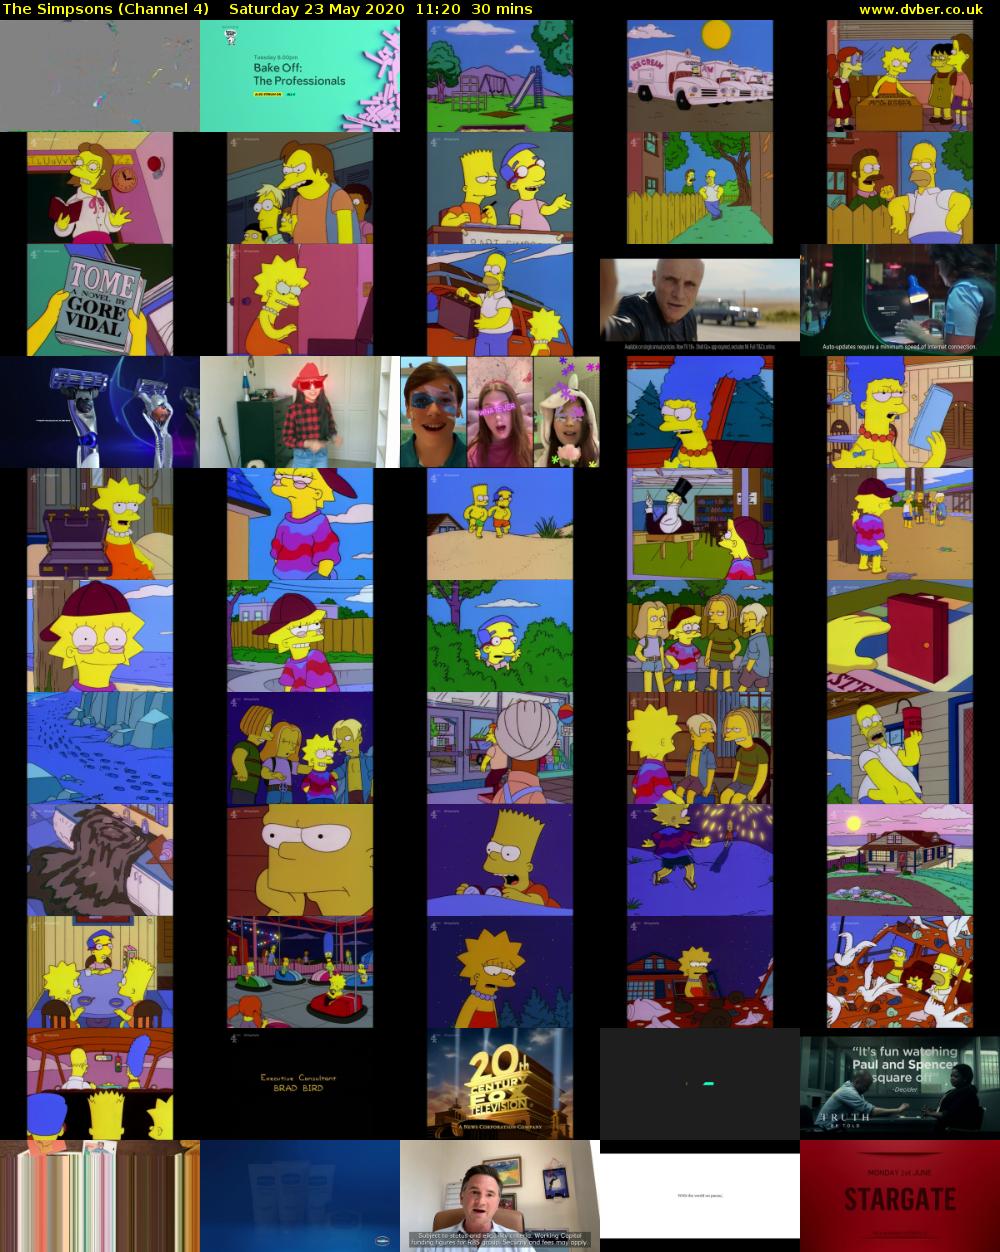 The Simpsons (Channel 4) Saturday 23 May 2020 11:20 - 11:50